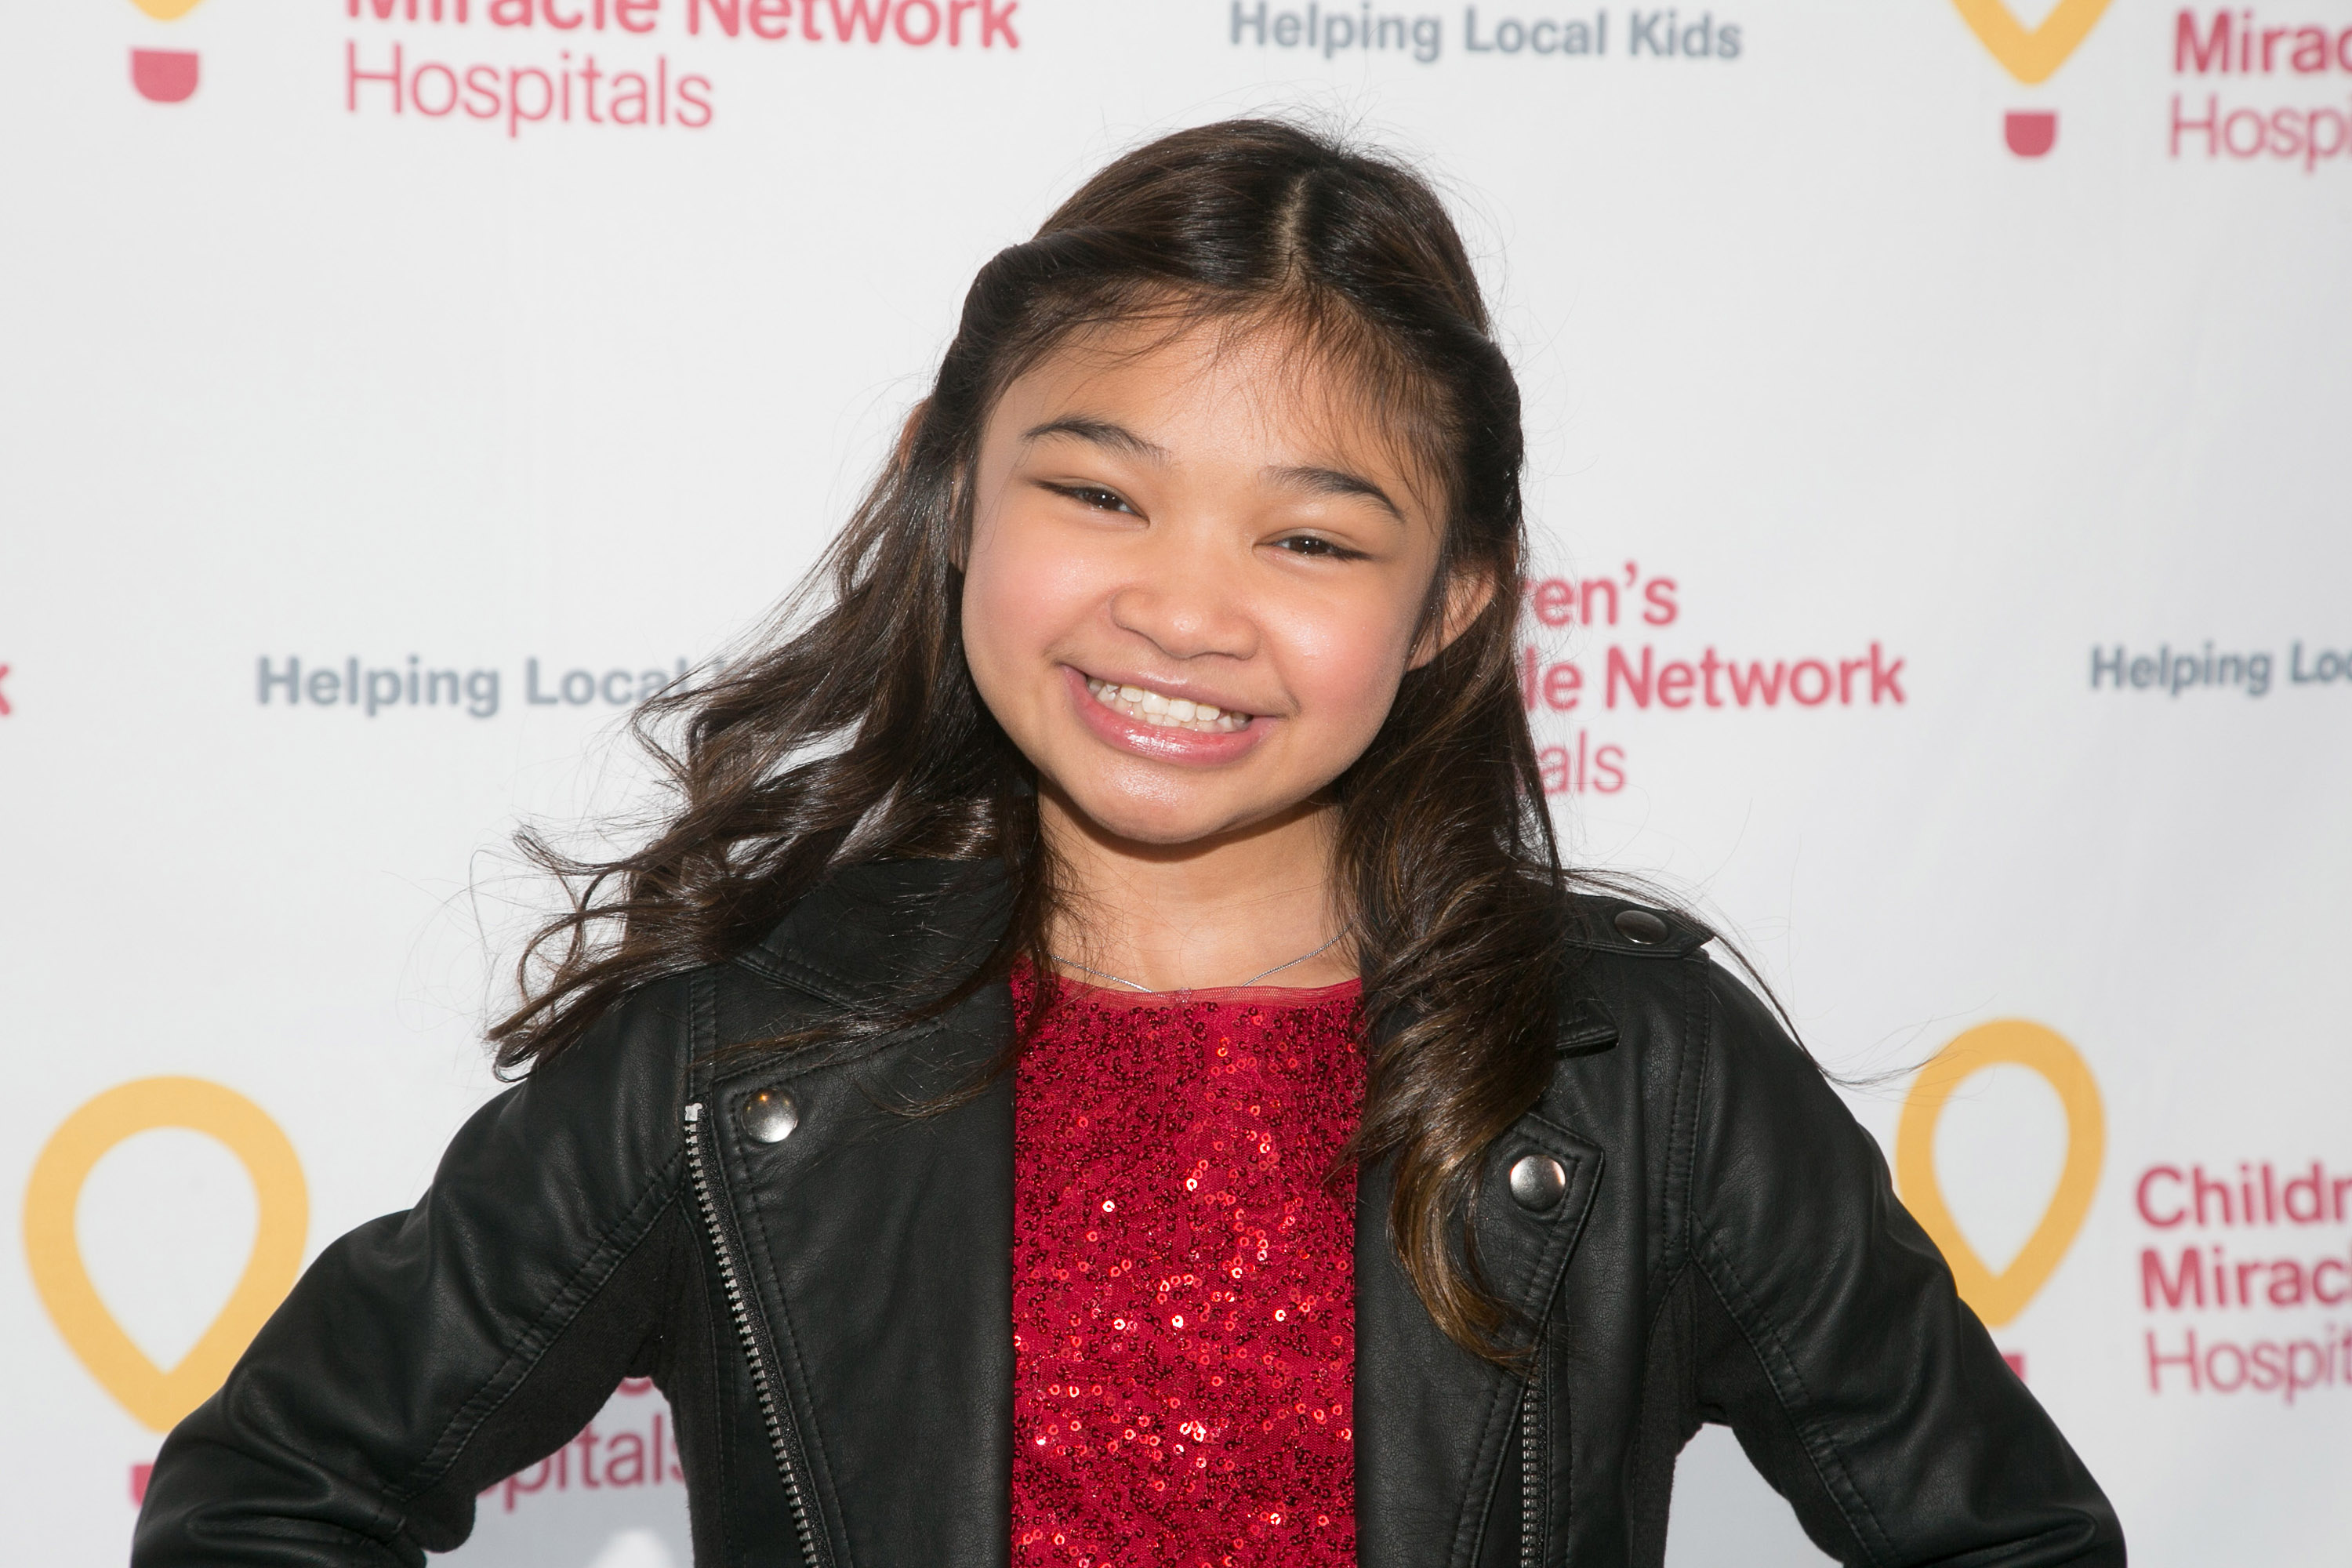 America's Got Talent' Runner Up Angelica Hale To Appear In New Movie